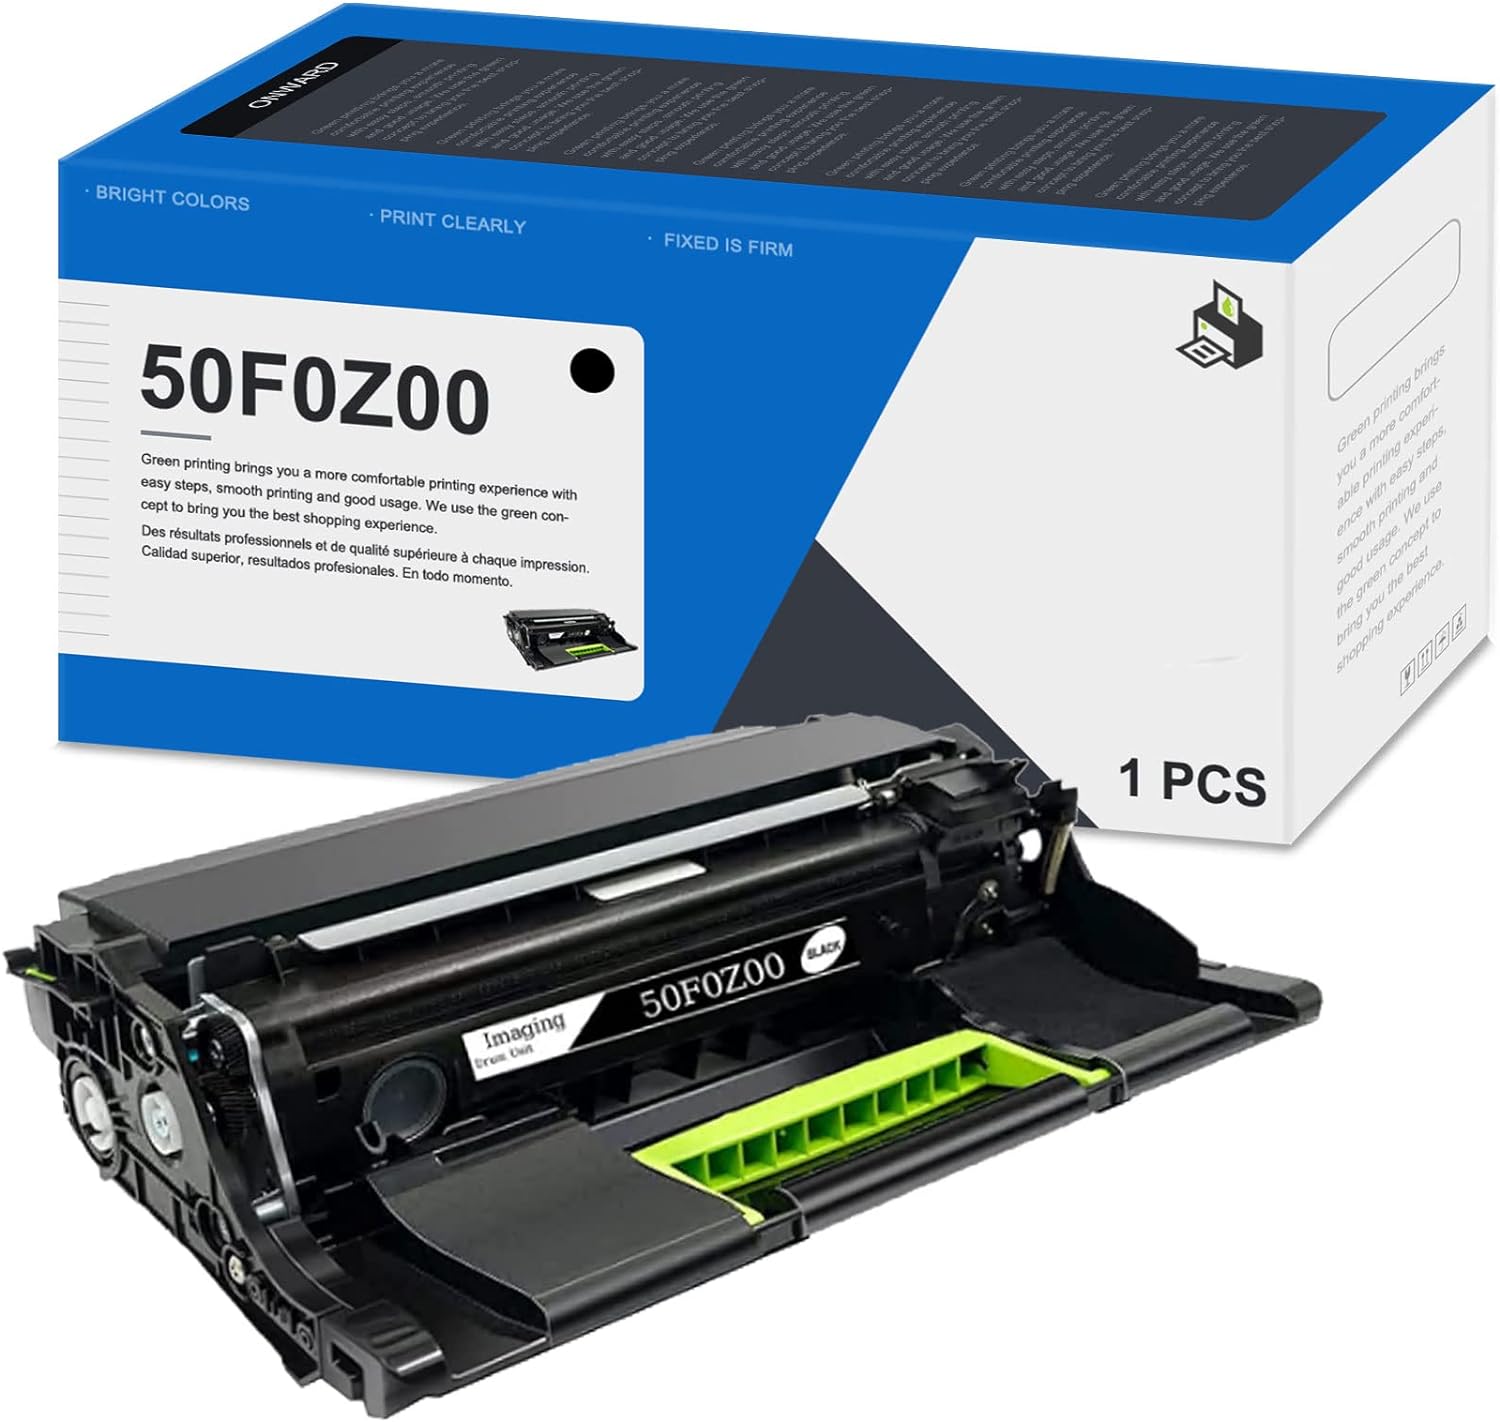 50F0Z00 Black Drum Unit - Onw 1-Pack50F0Z00 Black Drum Replacement for Lexmark 50F0Z00 MS310d MS310dn MS312dn MS315dn Printe, 50F0Z00 Drum - image 1 of 5